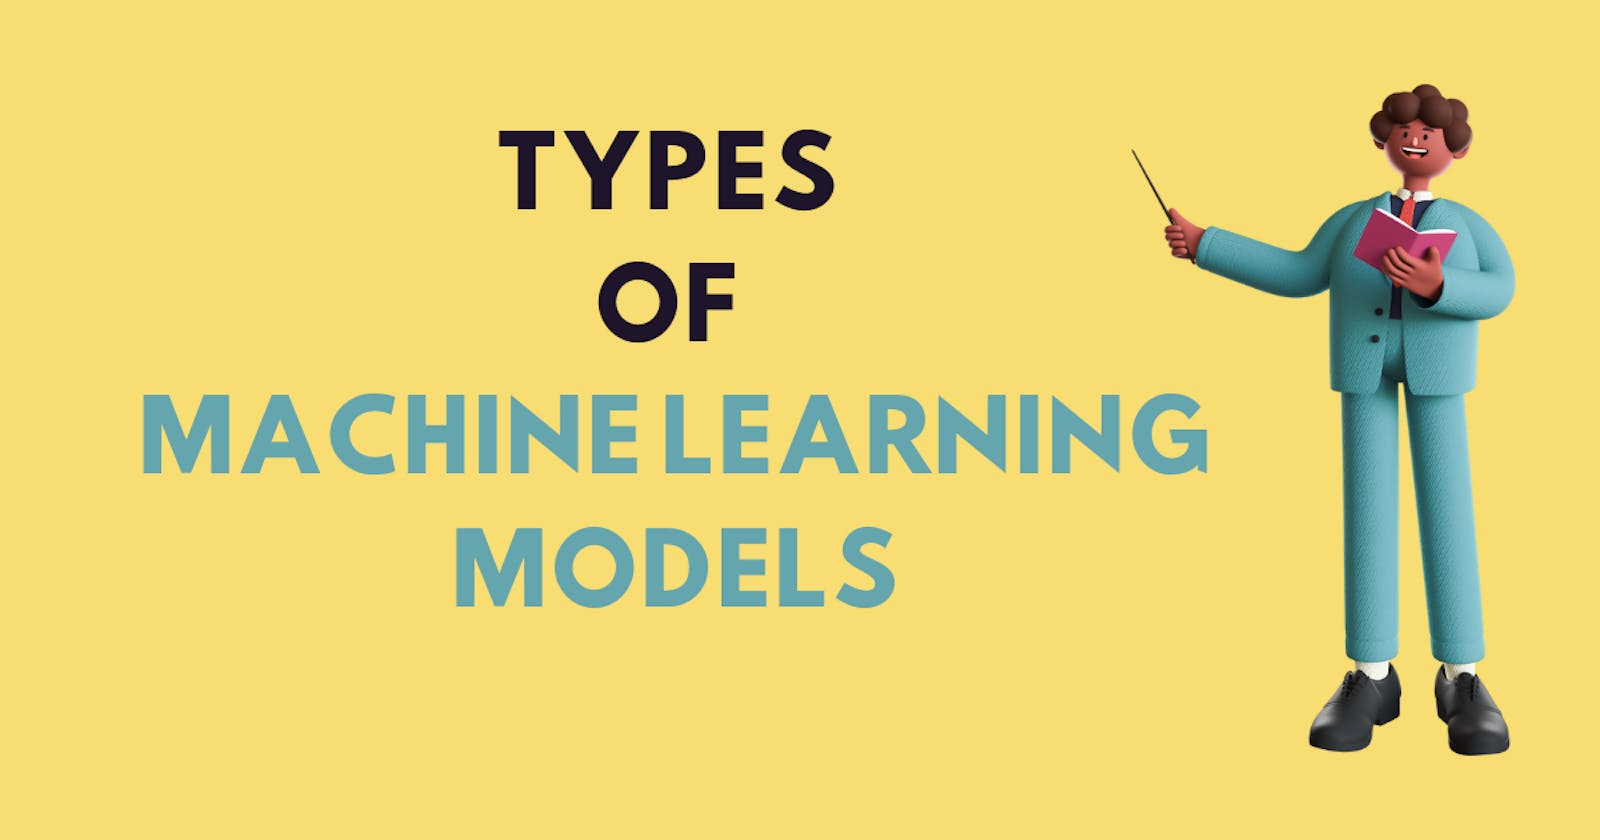 Types of Machine Learning Models